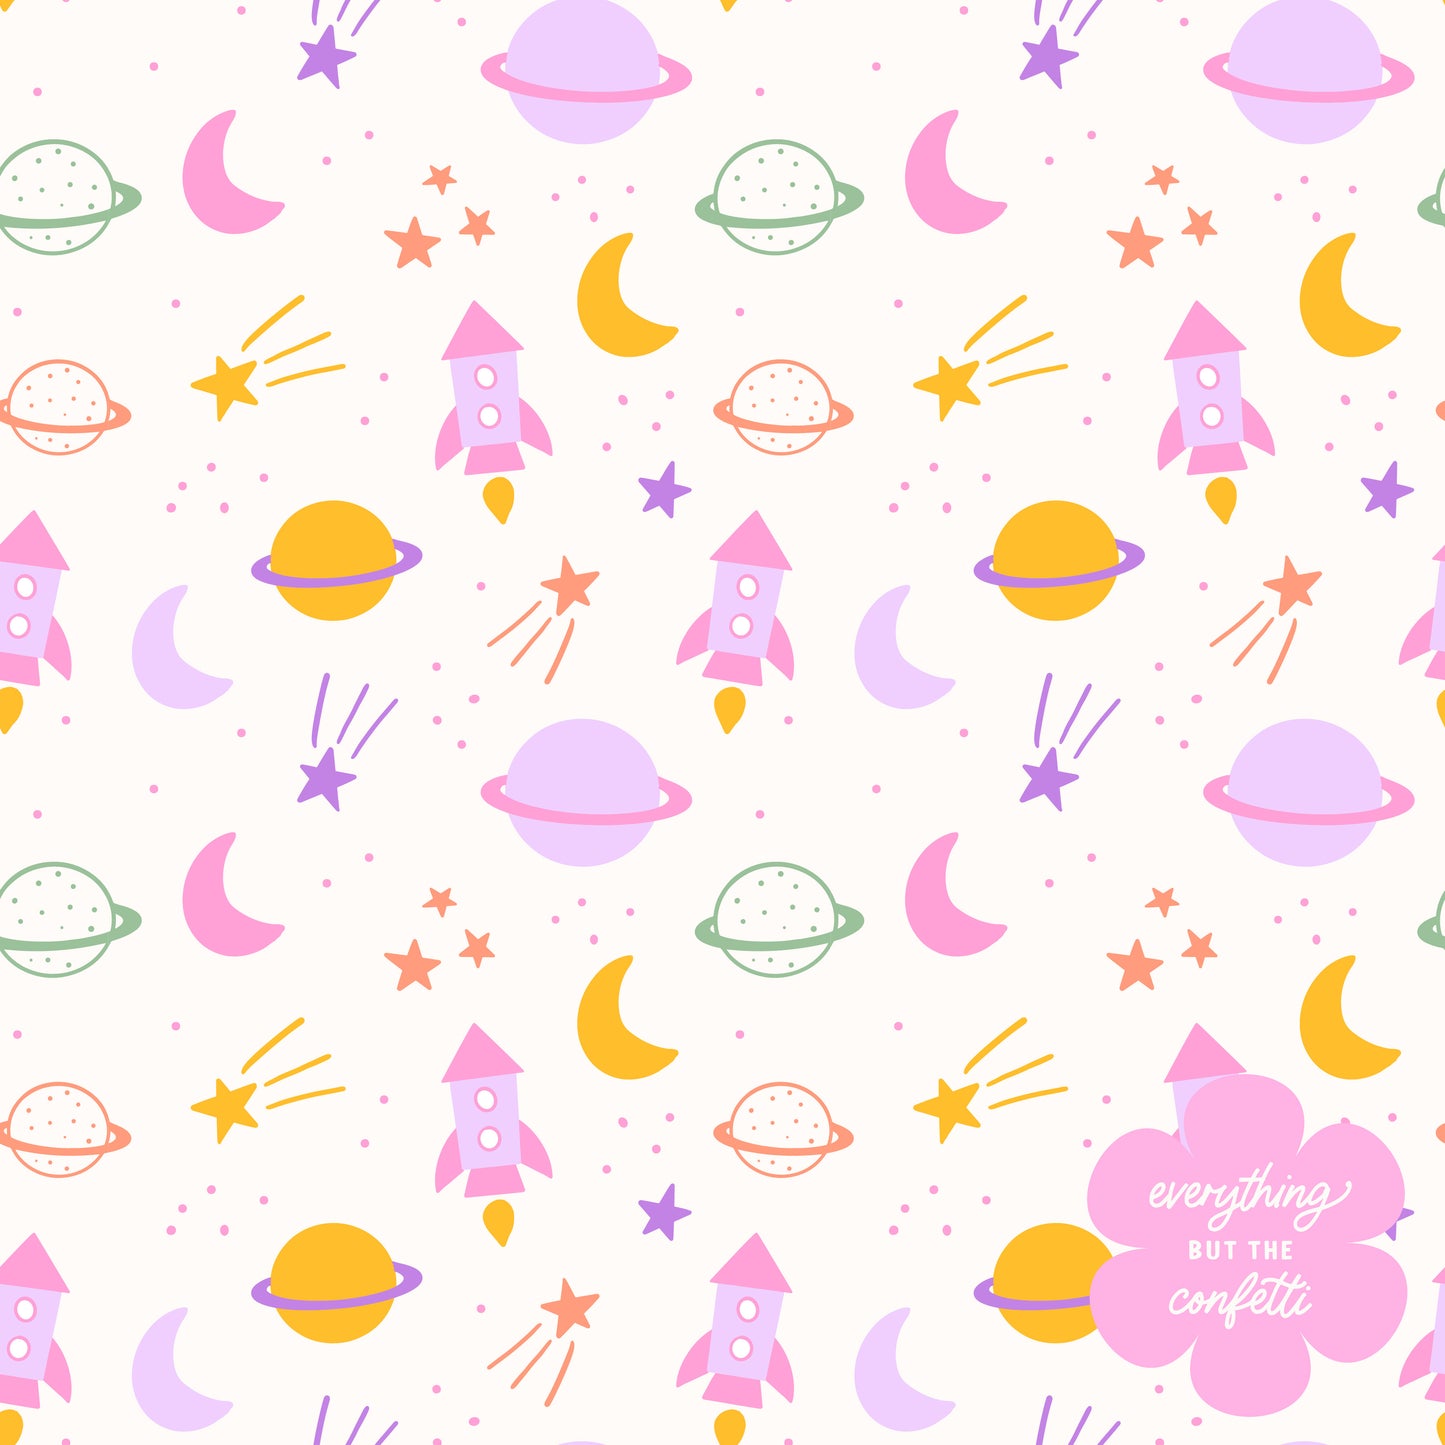 "Outer Space" (Pink) Seamless Digital Pattern